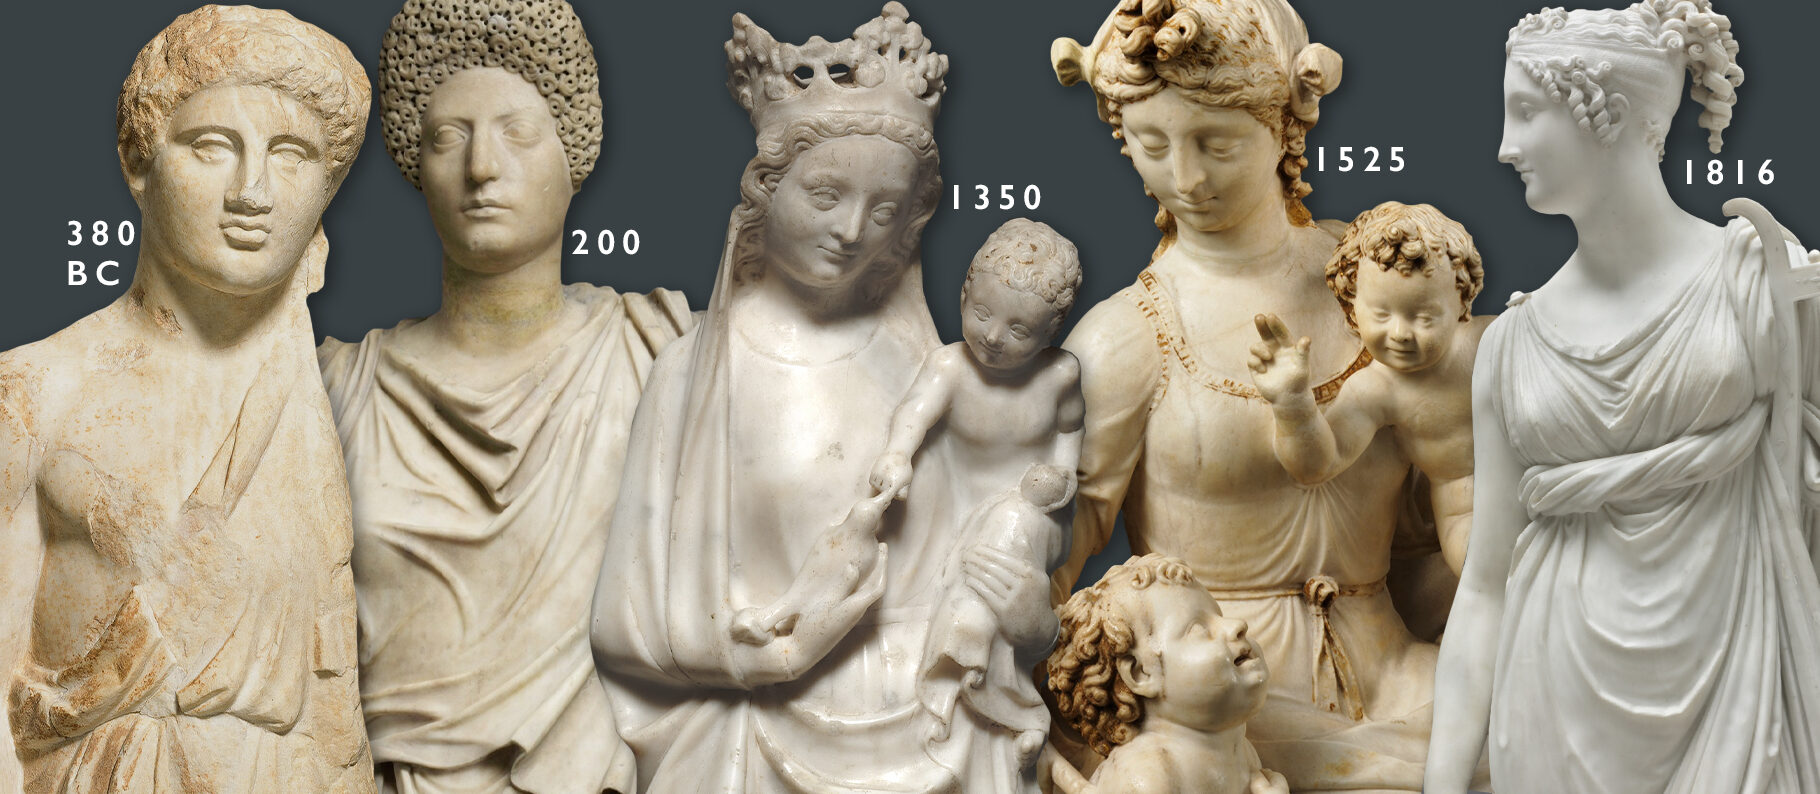 Marble statue history